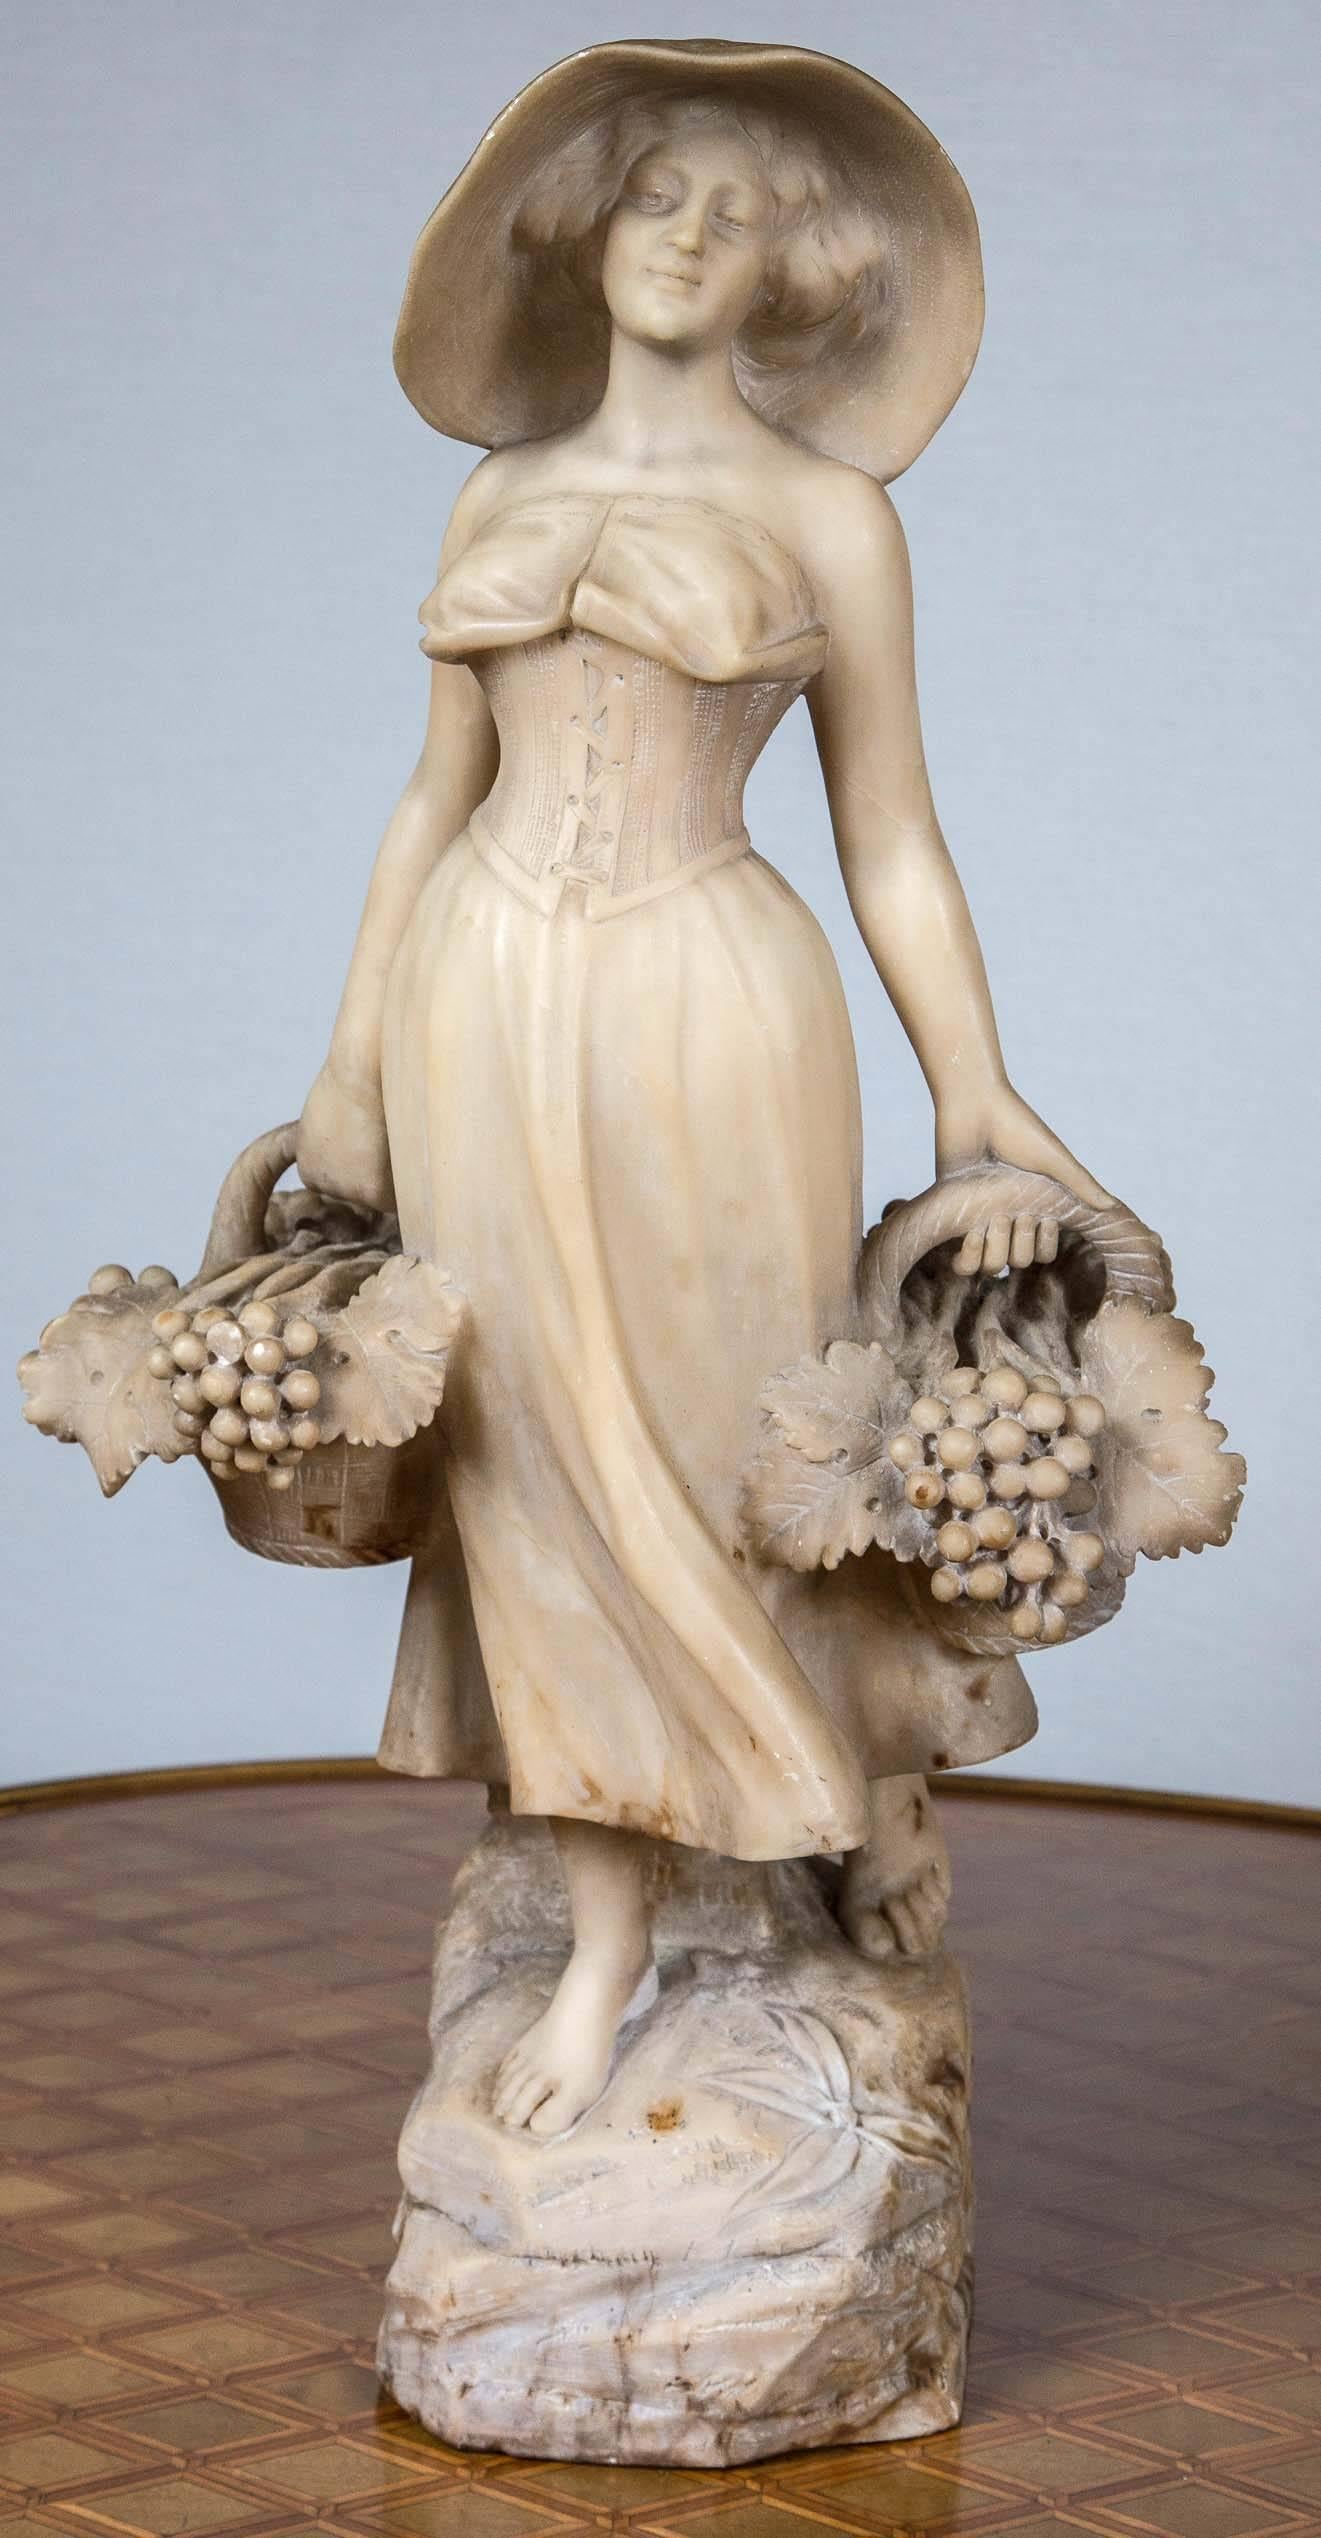 She stands on a rock grouping with a basket of grapes and grape leaves in each hand.
Her straw had finely carved showing the tight pattern of the straw. She wears a laced bodice and long flowing skirt.
Hand chisel marks evident.
There is no